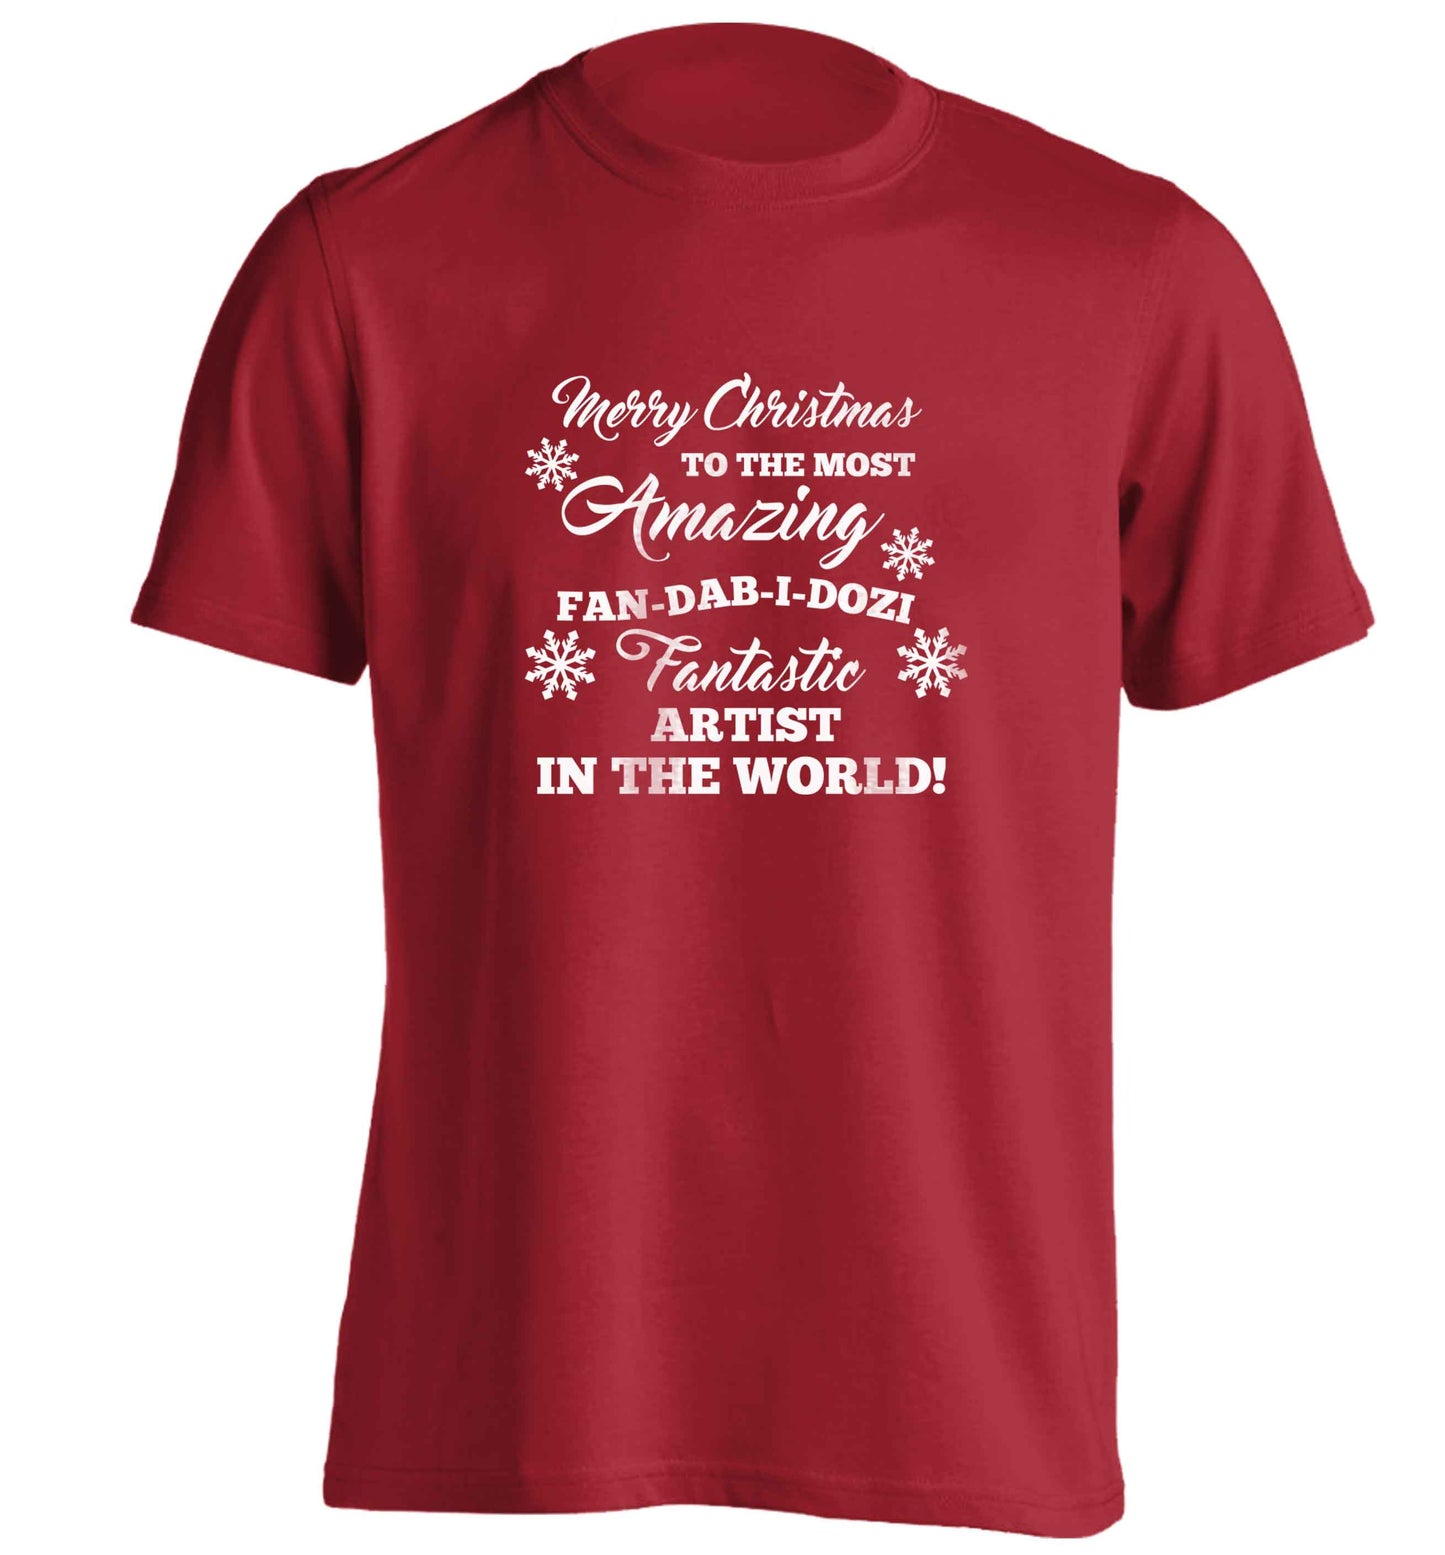 Merry Christmas to the most amazing artist in the world! adults unisex red Tshirt 2XL